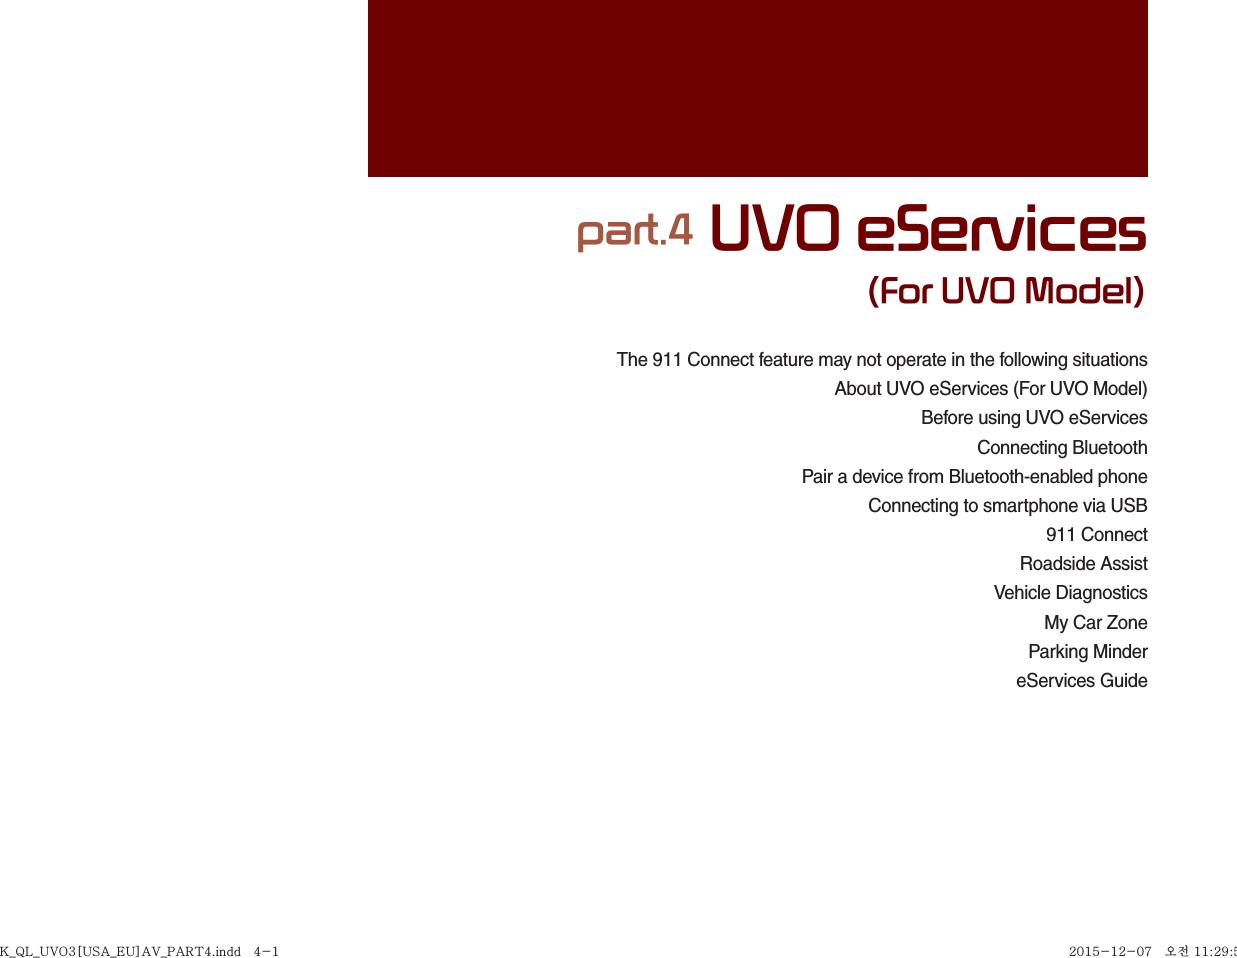 The 911 Connect feature may not operate in the following situationsAbout UVO eServices (For UVO Model)Before using UVO eServices Connecting BluetoothPair a device from Bluetooth-enabled phoneConnecting to smartphone via USB911 ConnectRoadside AssistVehicle DiagnosticsMy Car ZoneParking MindereServices Guidepart.4 UVO eServices(For UVO Model)K_QL_UVO3[USA_EU]AV_PART4.indd   4-1K_QL_UVO3[USA_EU]AV_PART4.indd   4-1 2015-12-07   오전 11:29:542015-12-07   오전 11:29:5